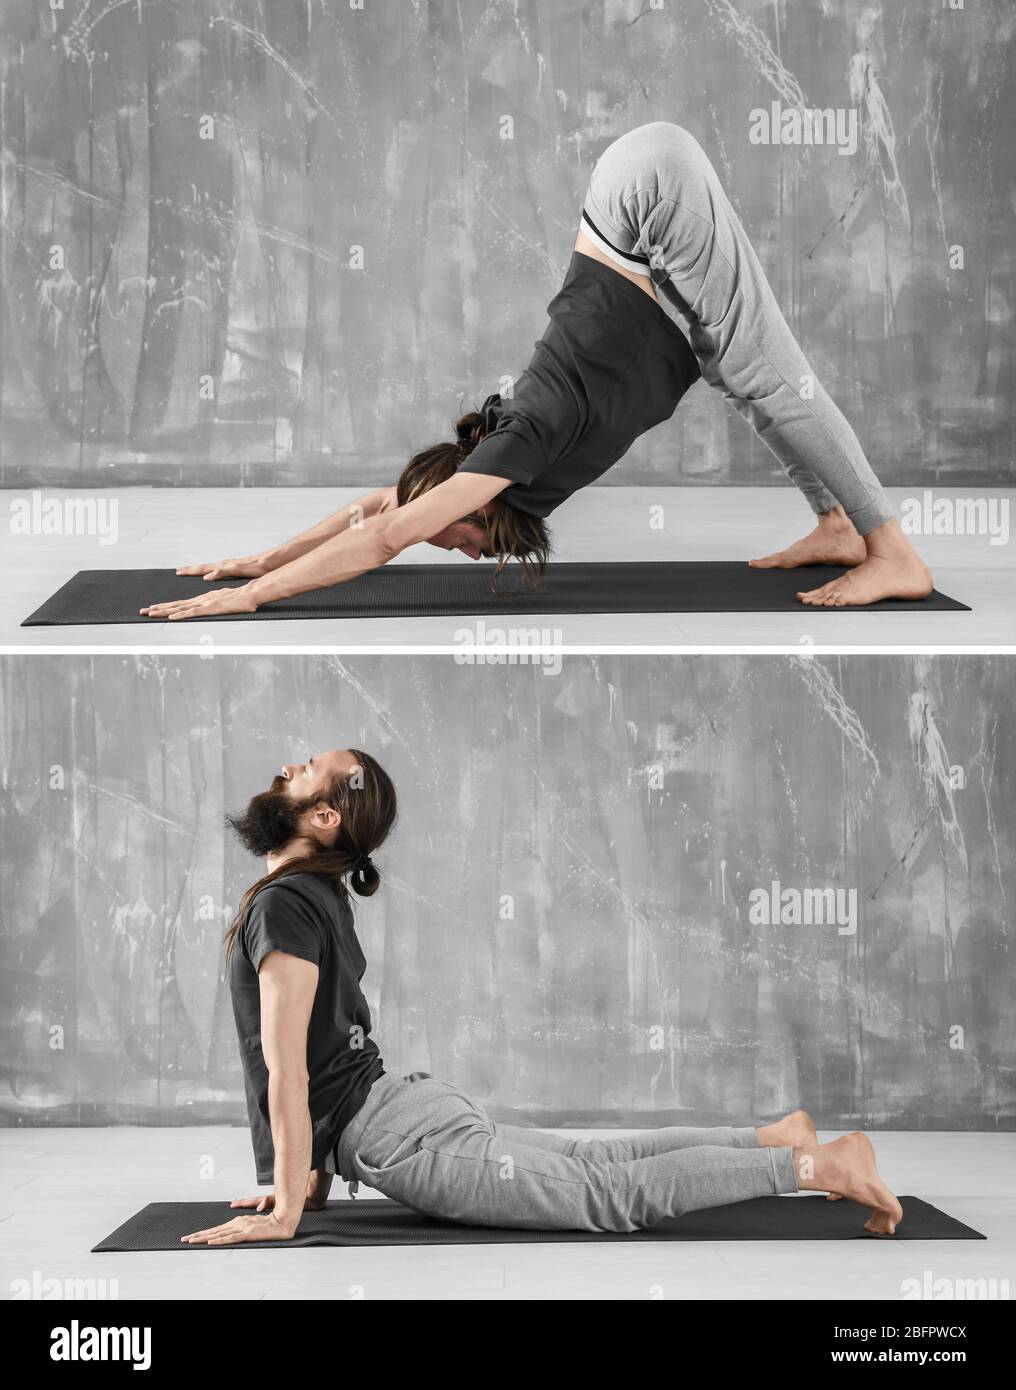 https://c8.alamy.com/comp/2BFPWCX/collage-of-man-doing-different-yoga-poses-on-grunge-wall-background-2BFPWCX.jpg